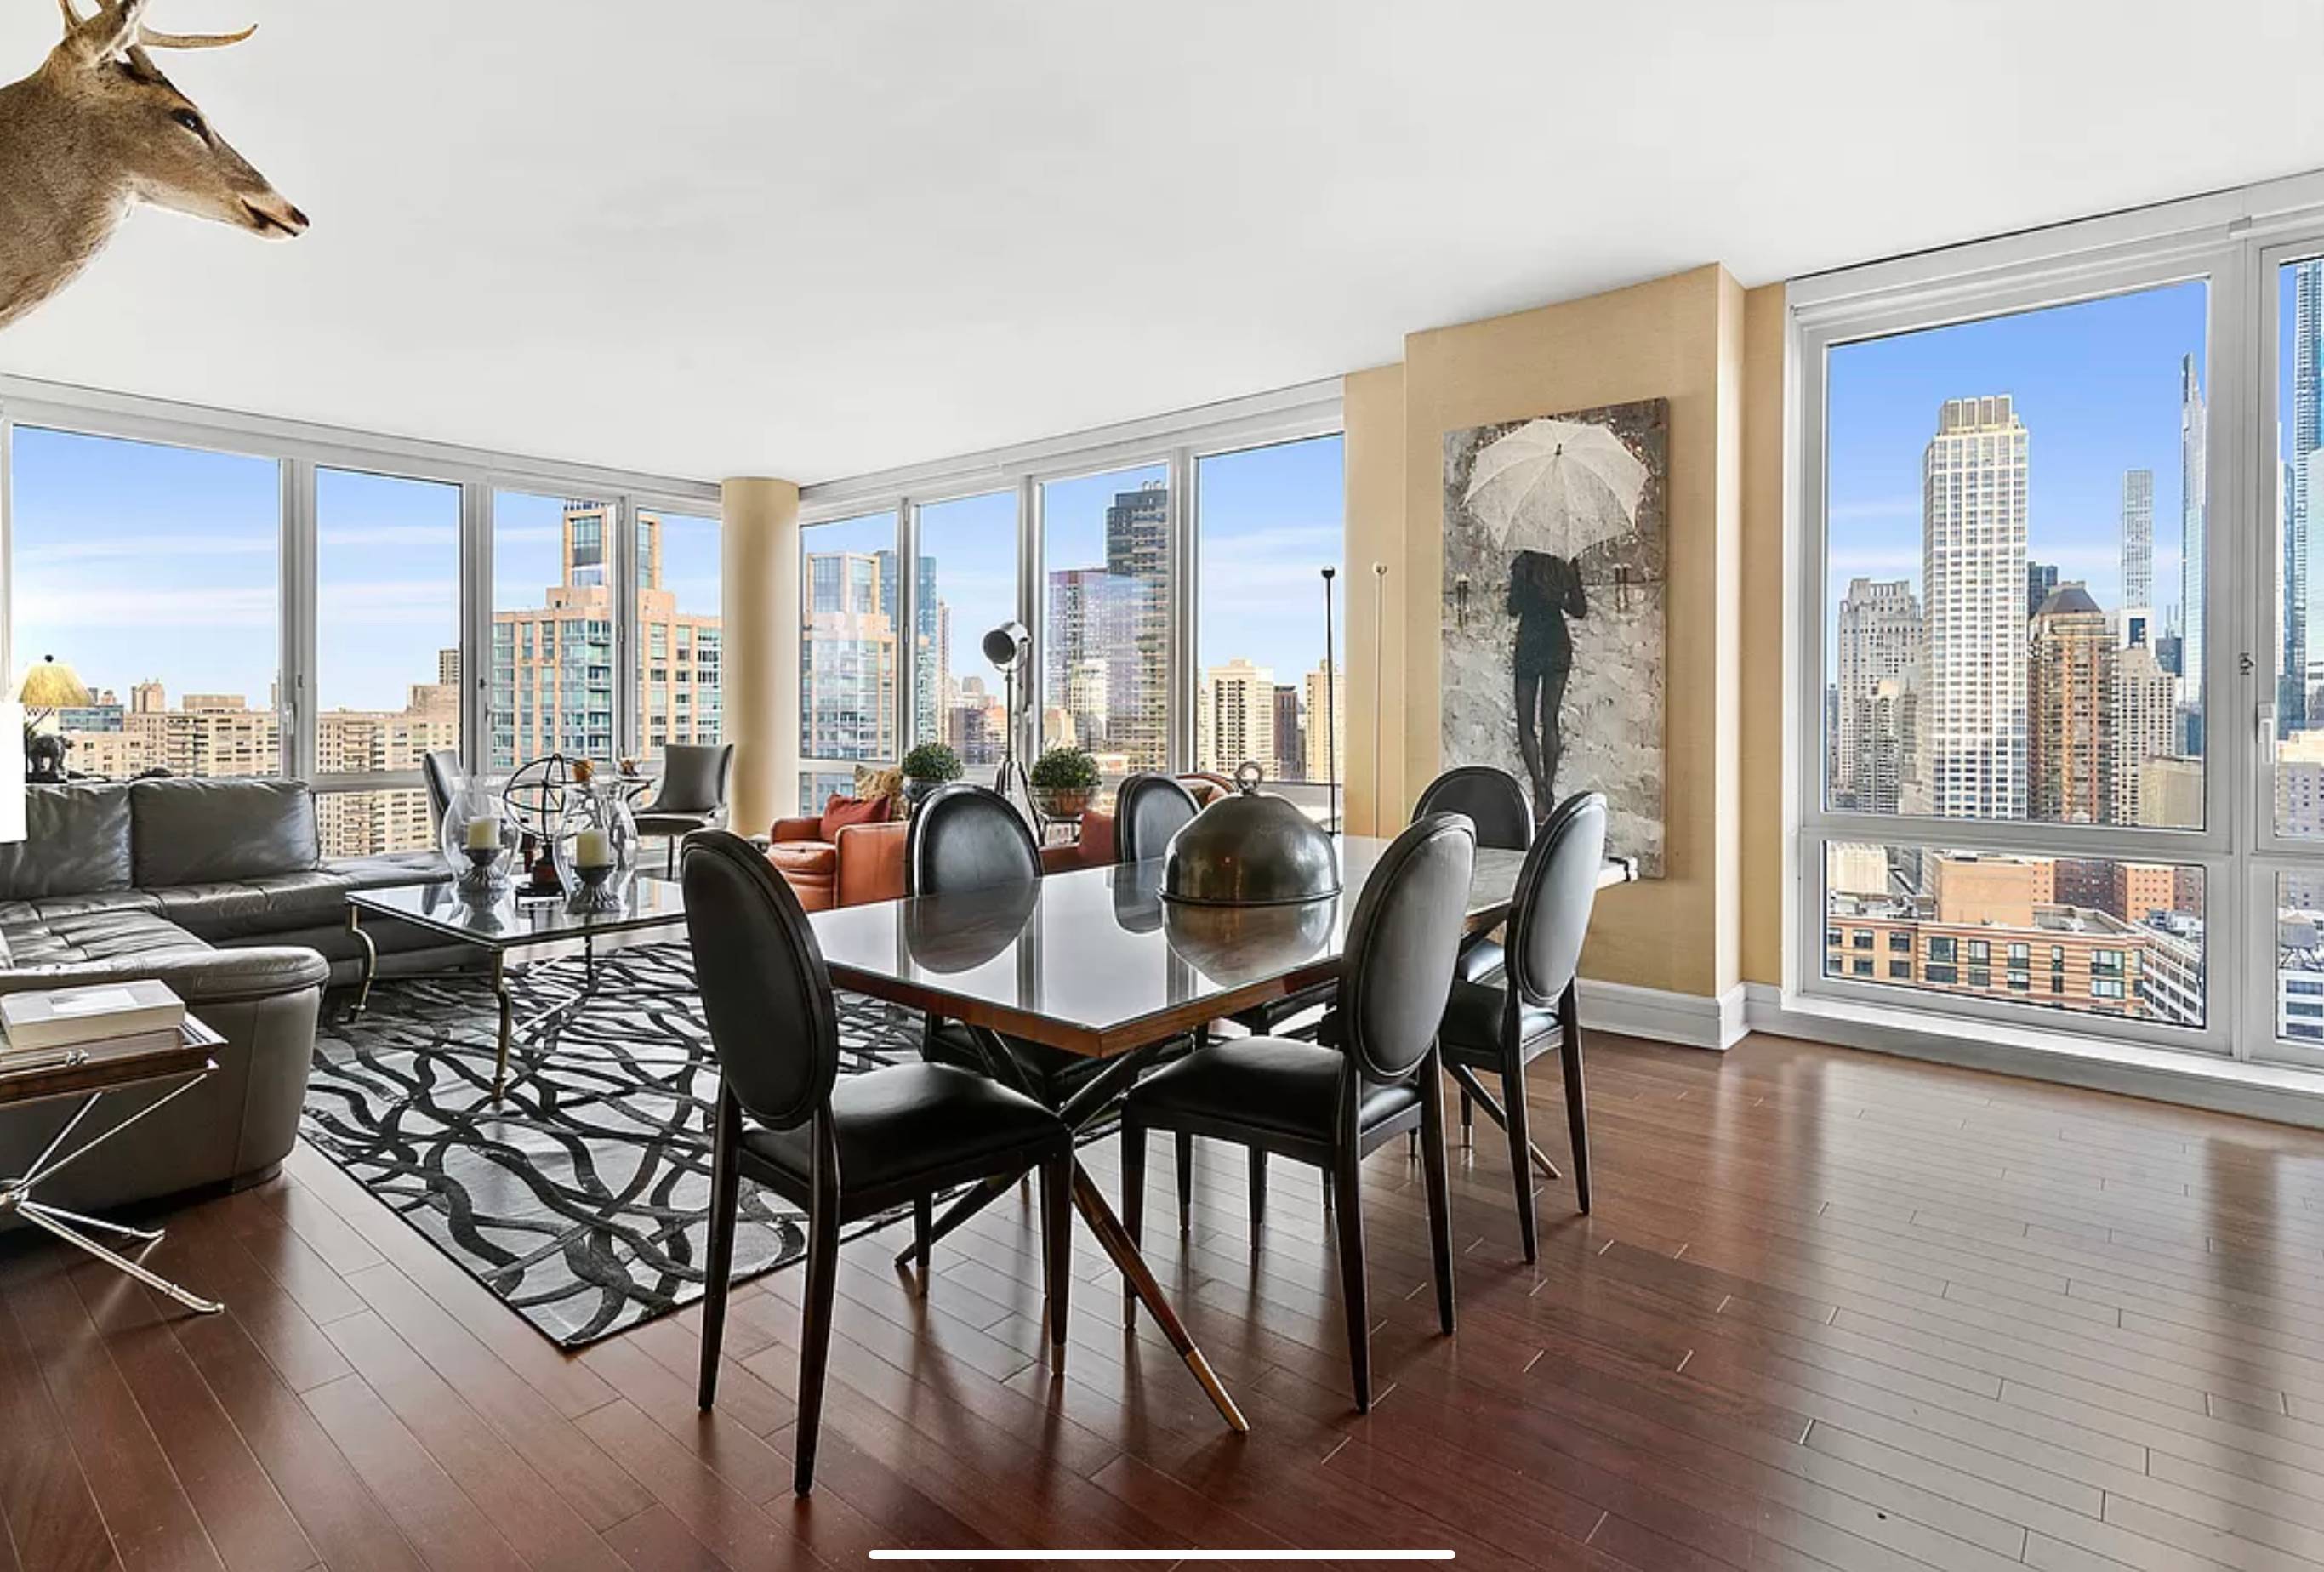 Fantastic fully furnished 3 bedroom, 3 bath residence boasts expansive New York City skyline and Hudson River views